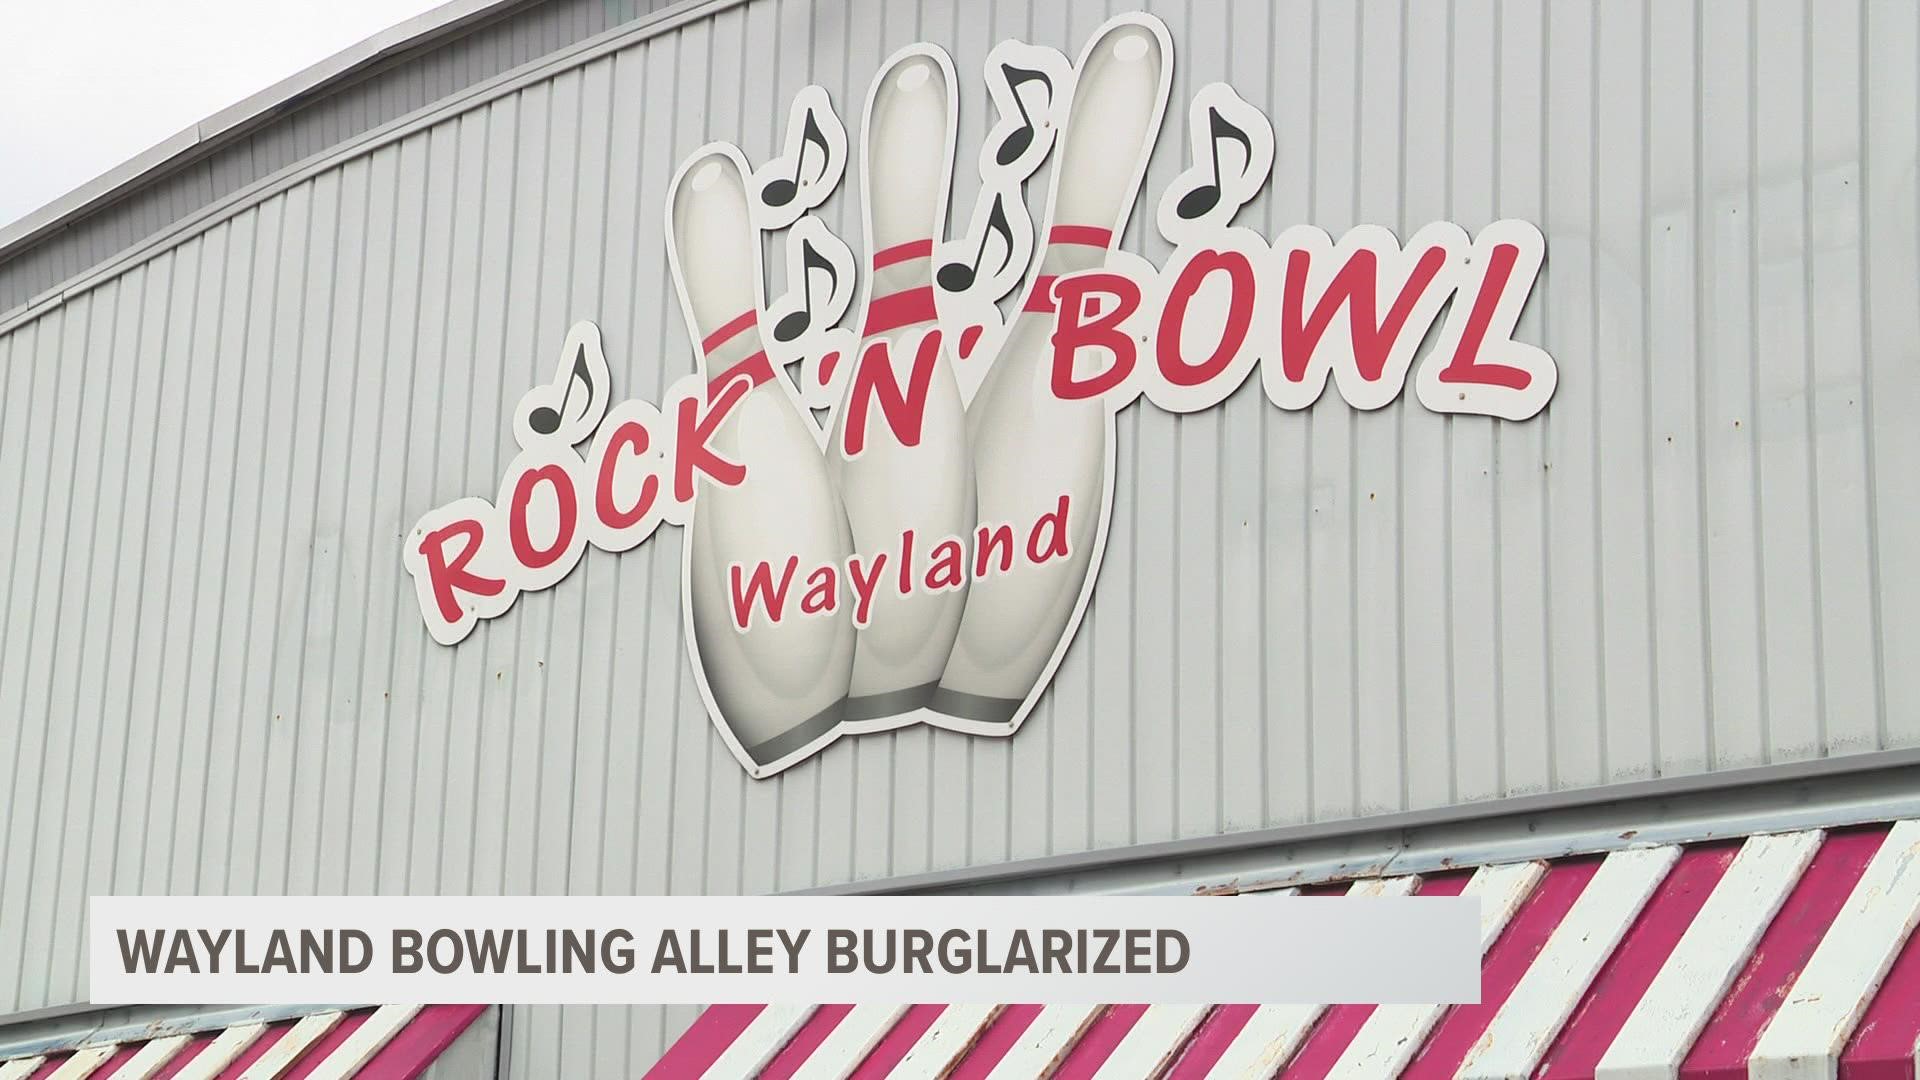 The community is rallying behind Rock 'N' Bowl after the bowling alley was broken into Tuesday night.